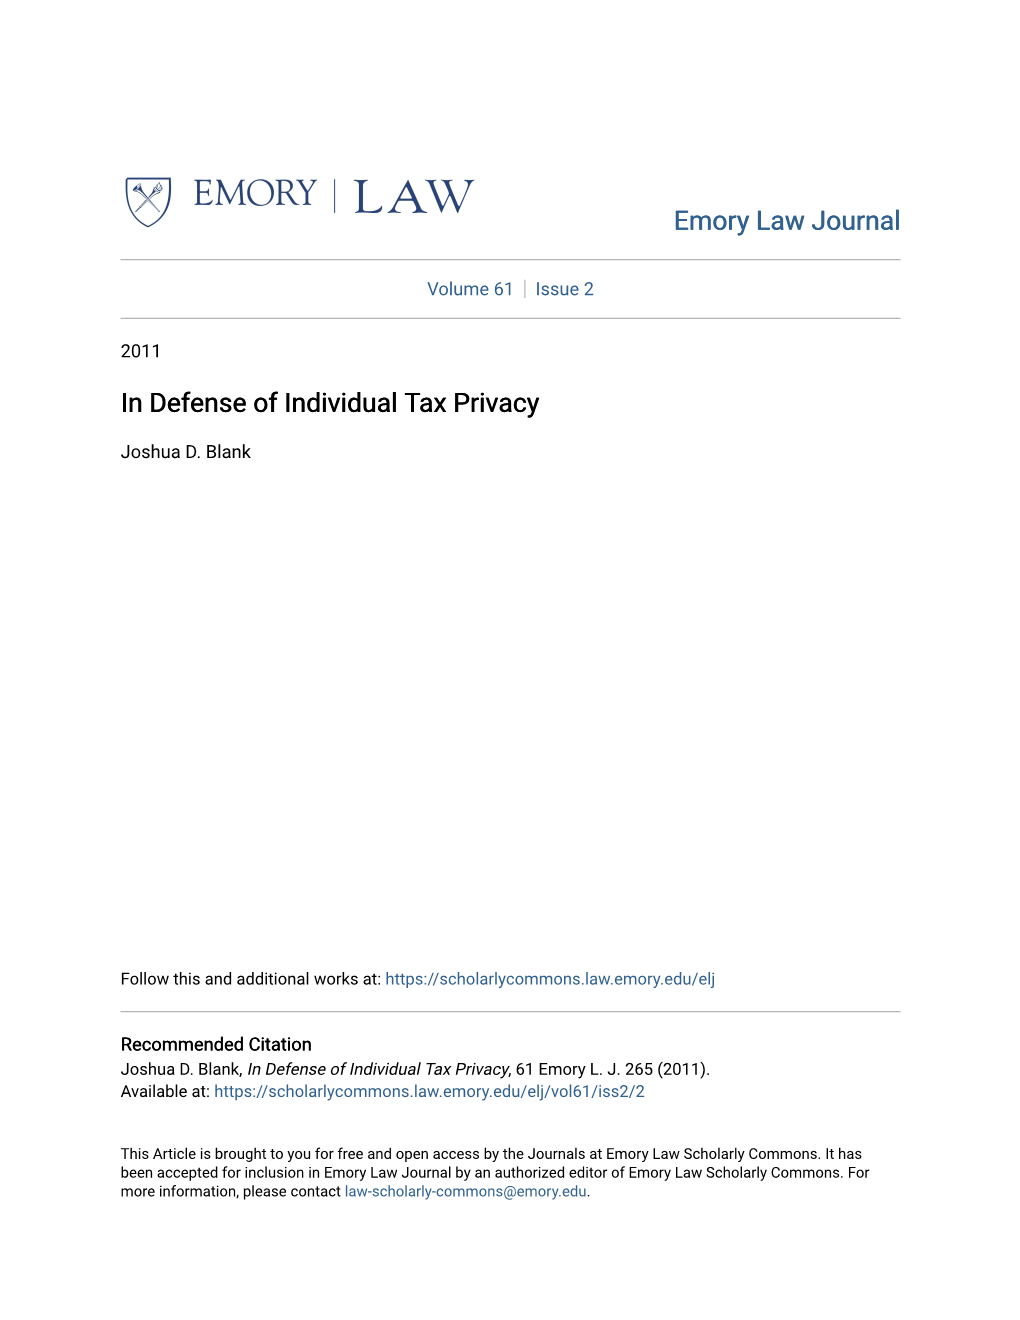 In Defense of Individual Tax Privacy